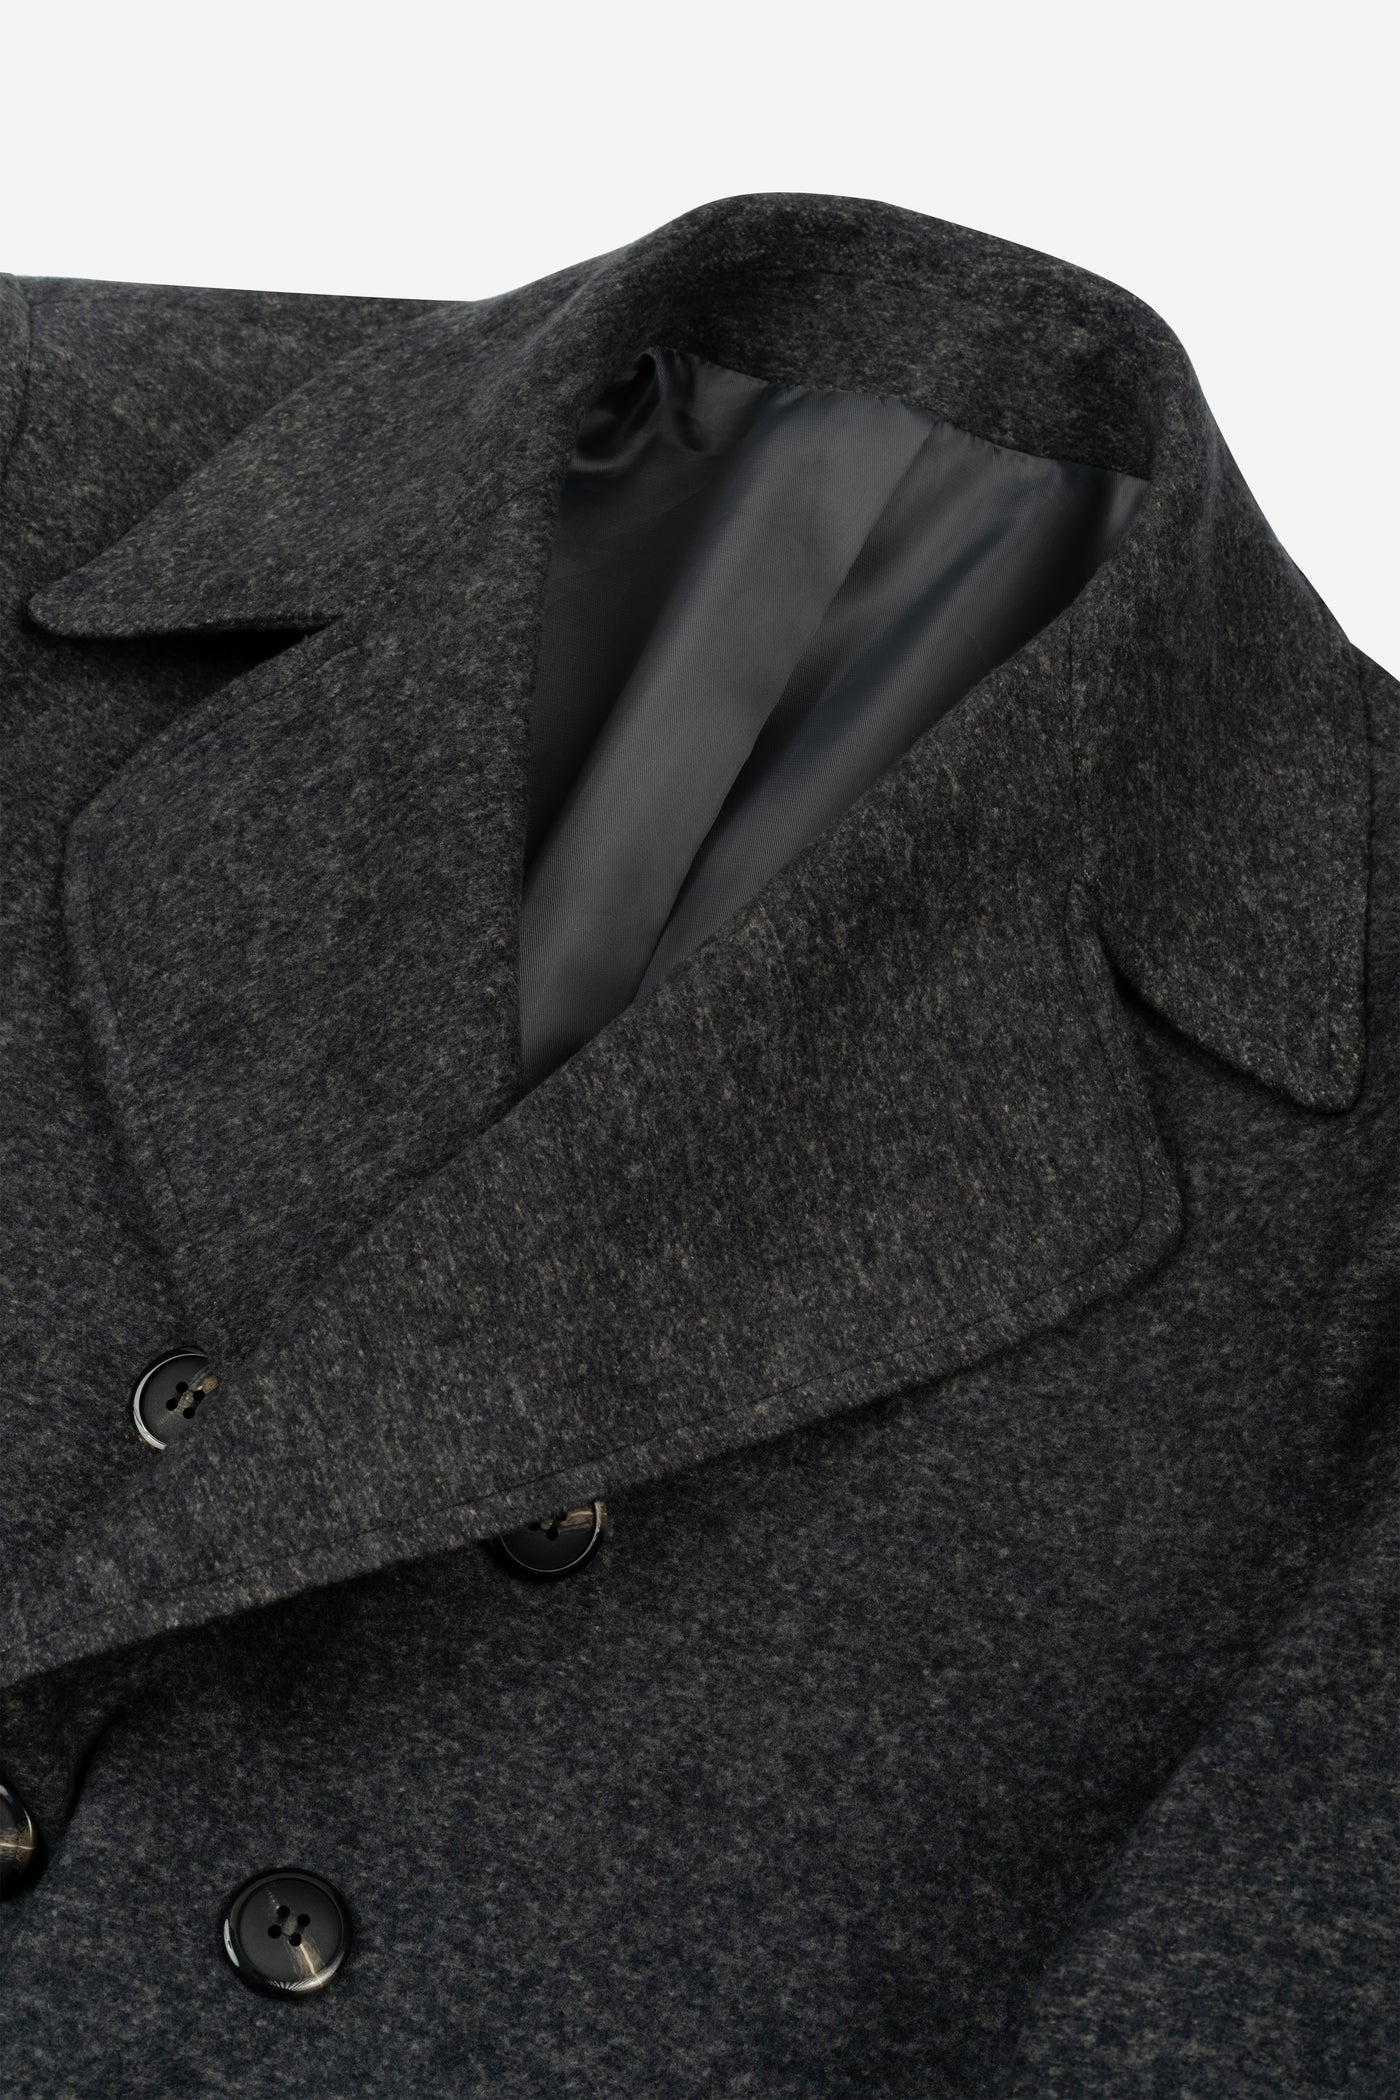 Jet Black Double-Breasted Poly Coat